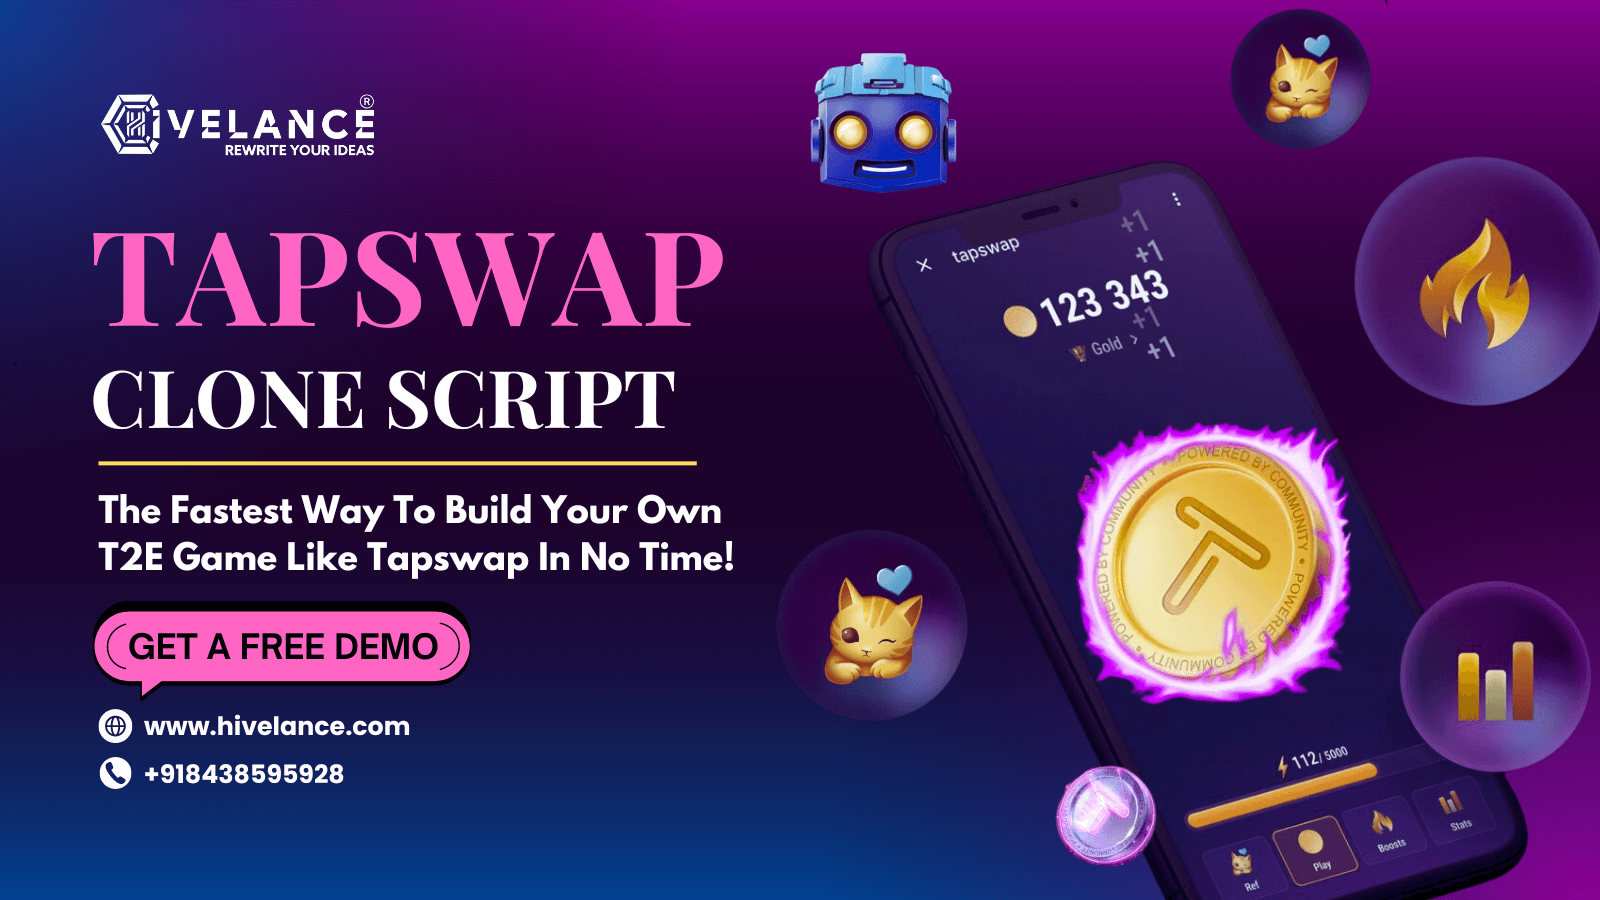 TapSwap Clone Script: The Fastest Way To Launch A Telegram-Based T2E Game Like TapSwap